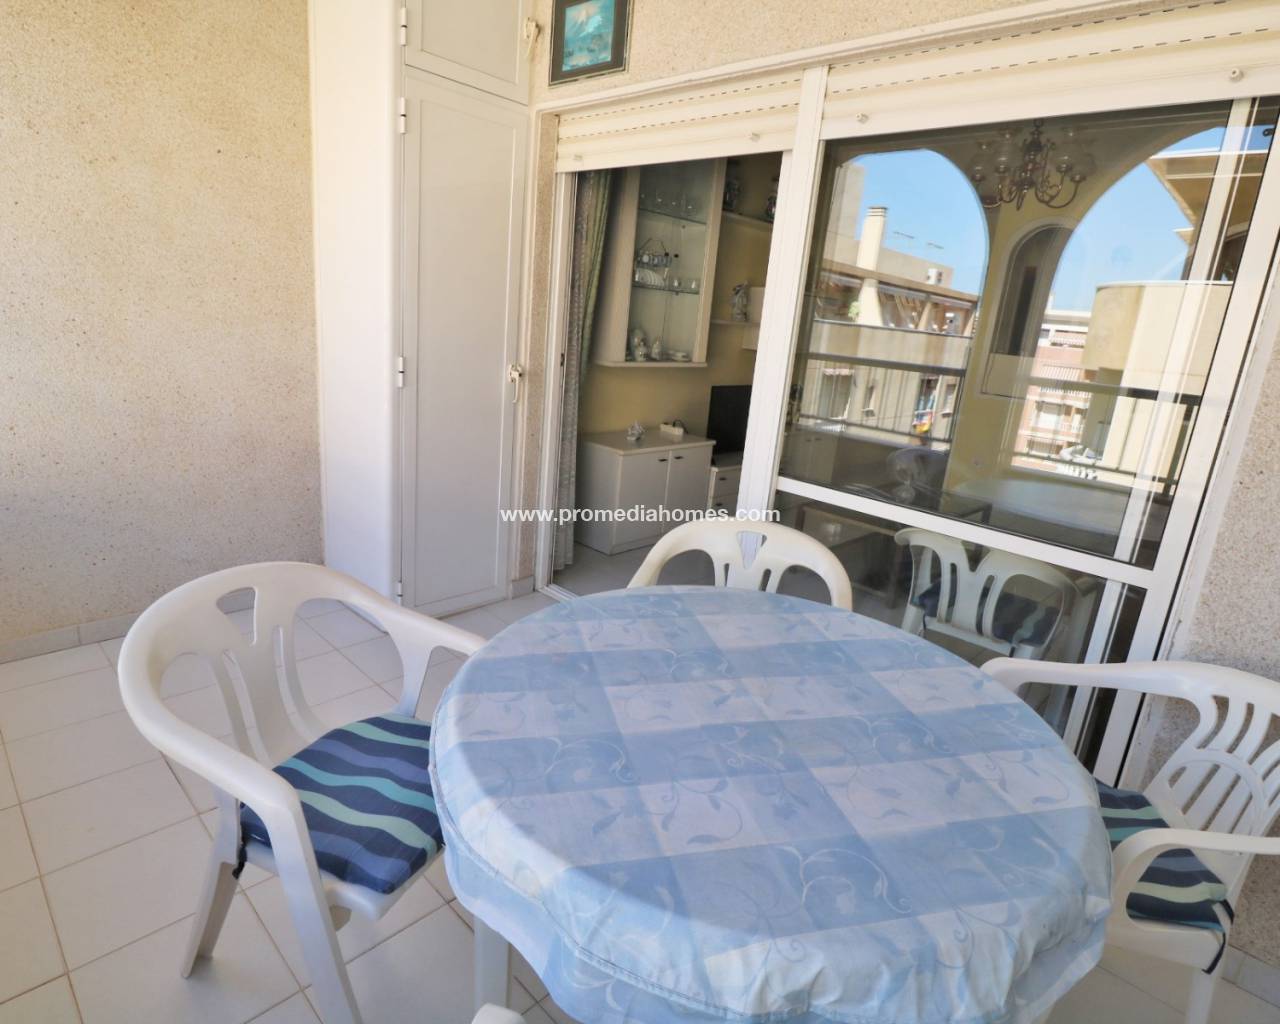 Penthouse for sale in Torrevieja Costa Blanca